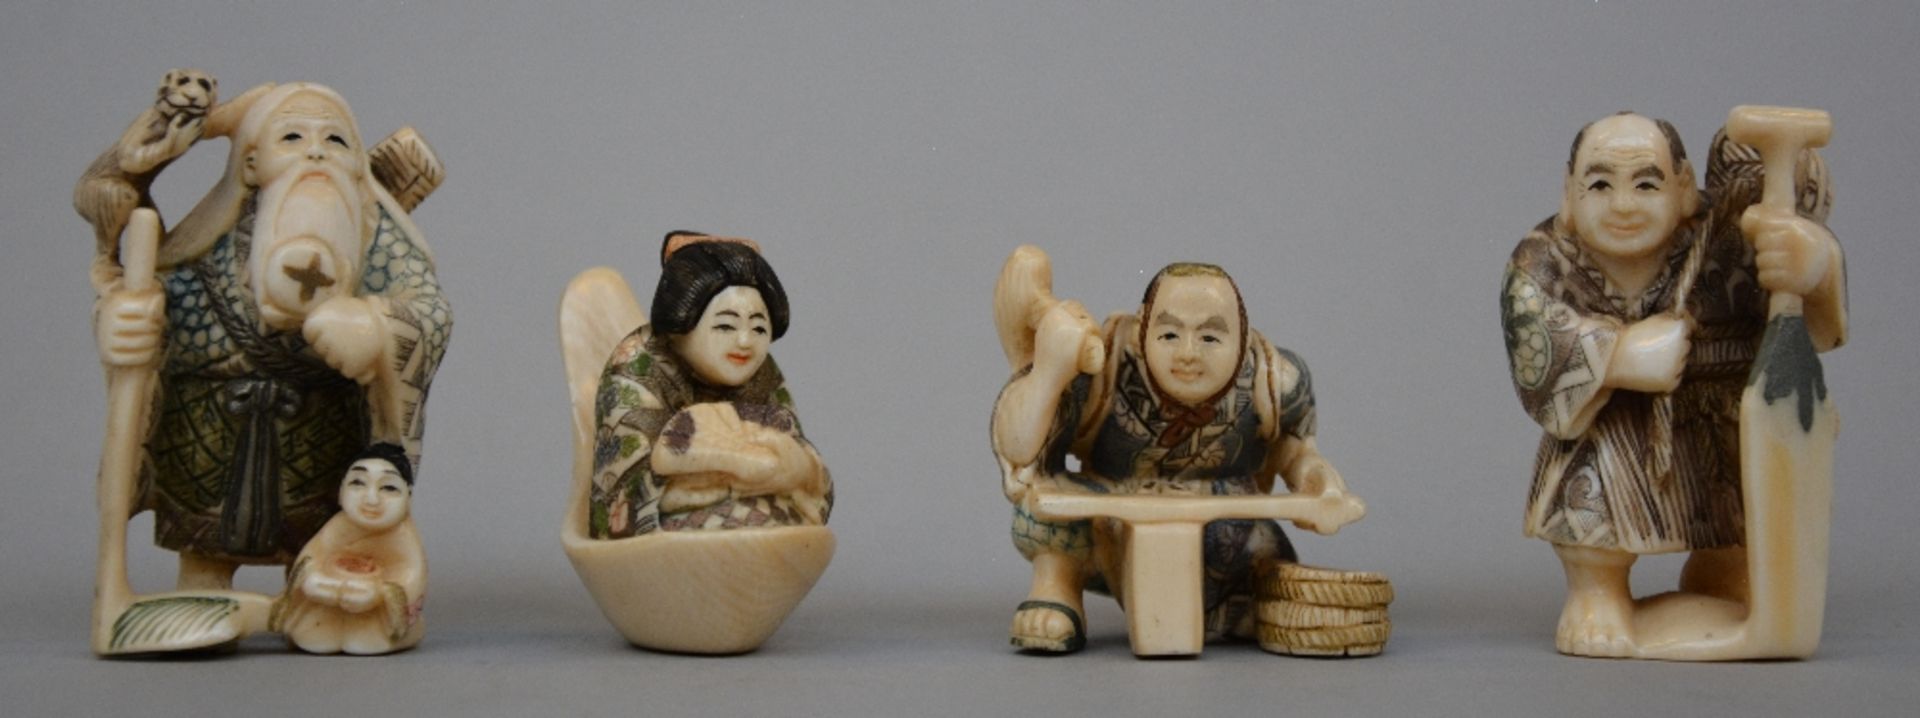 Seven netsuke/okimono, scrimshaw decorated, first half of 20thC, H 4 - 8,6 cm, Total weight 260 g - Image 2 of 3